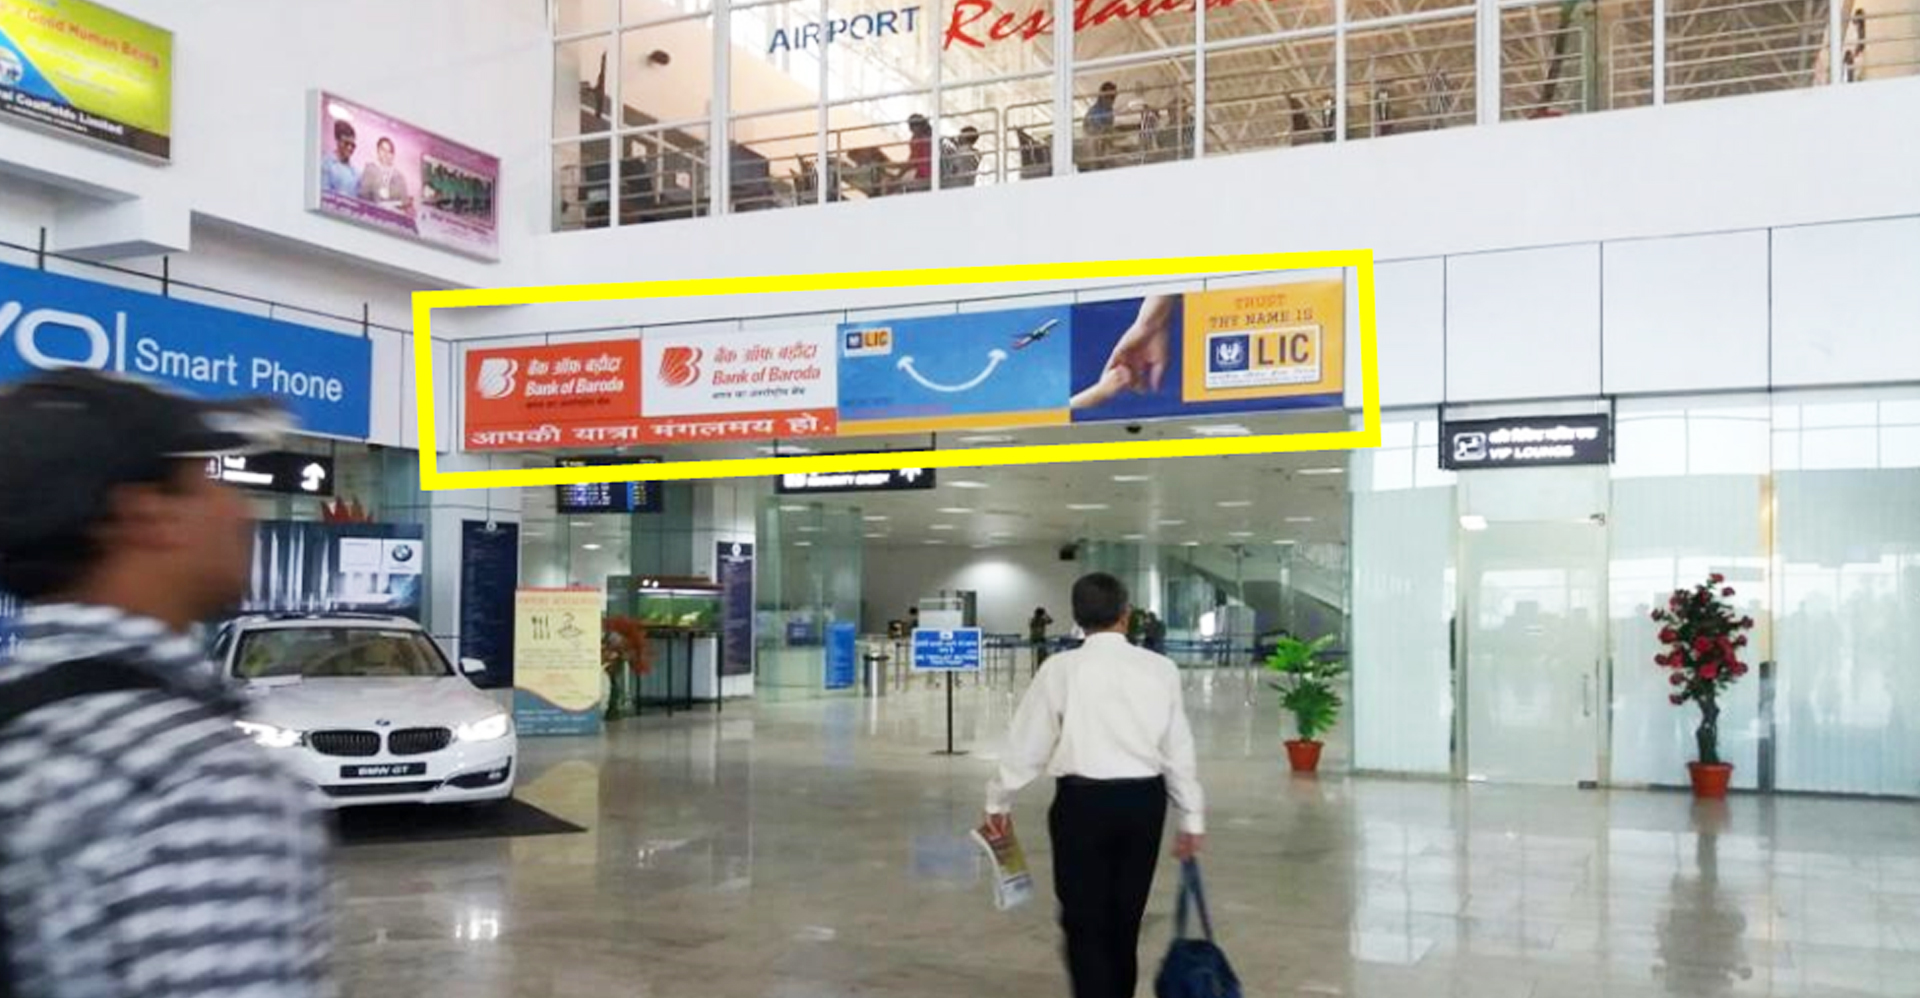 Airport Banner Ads